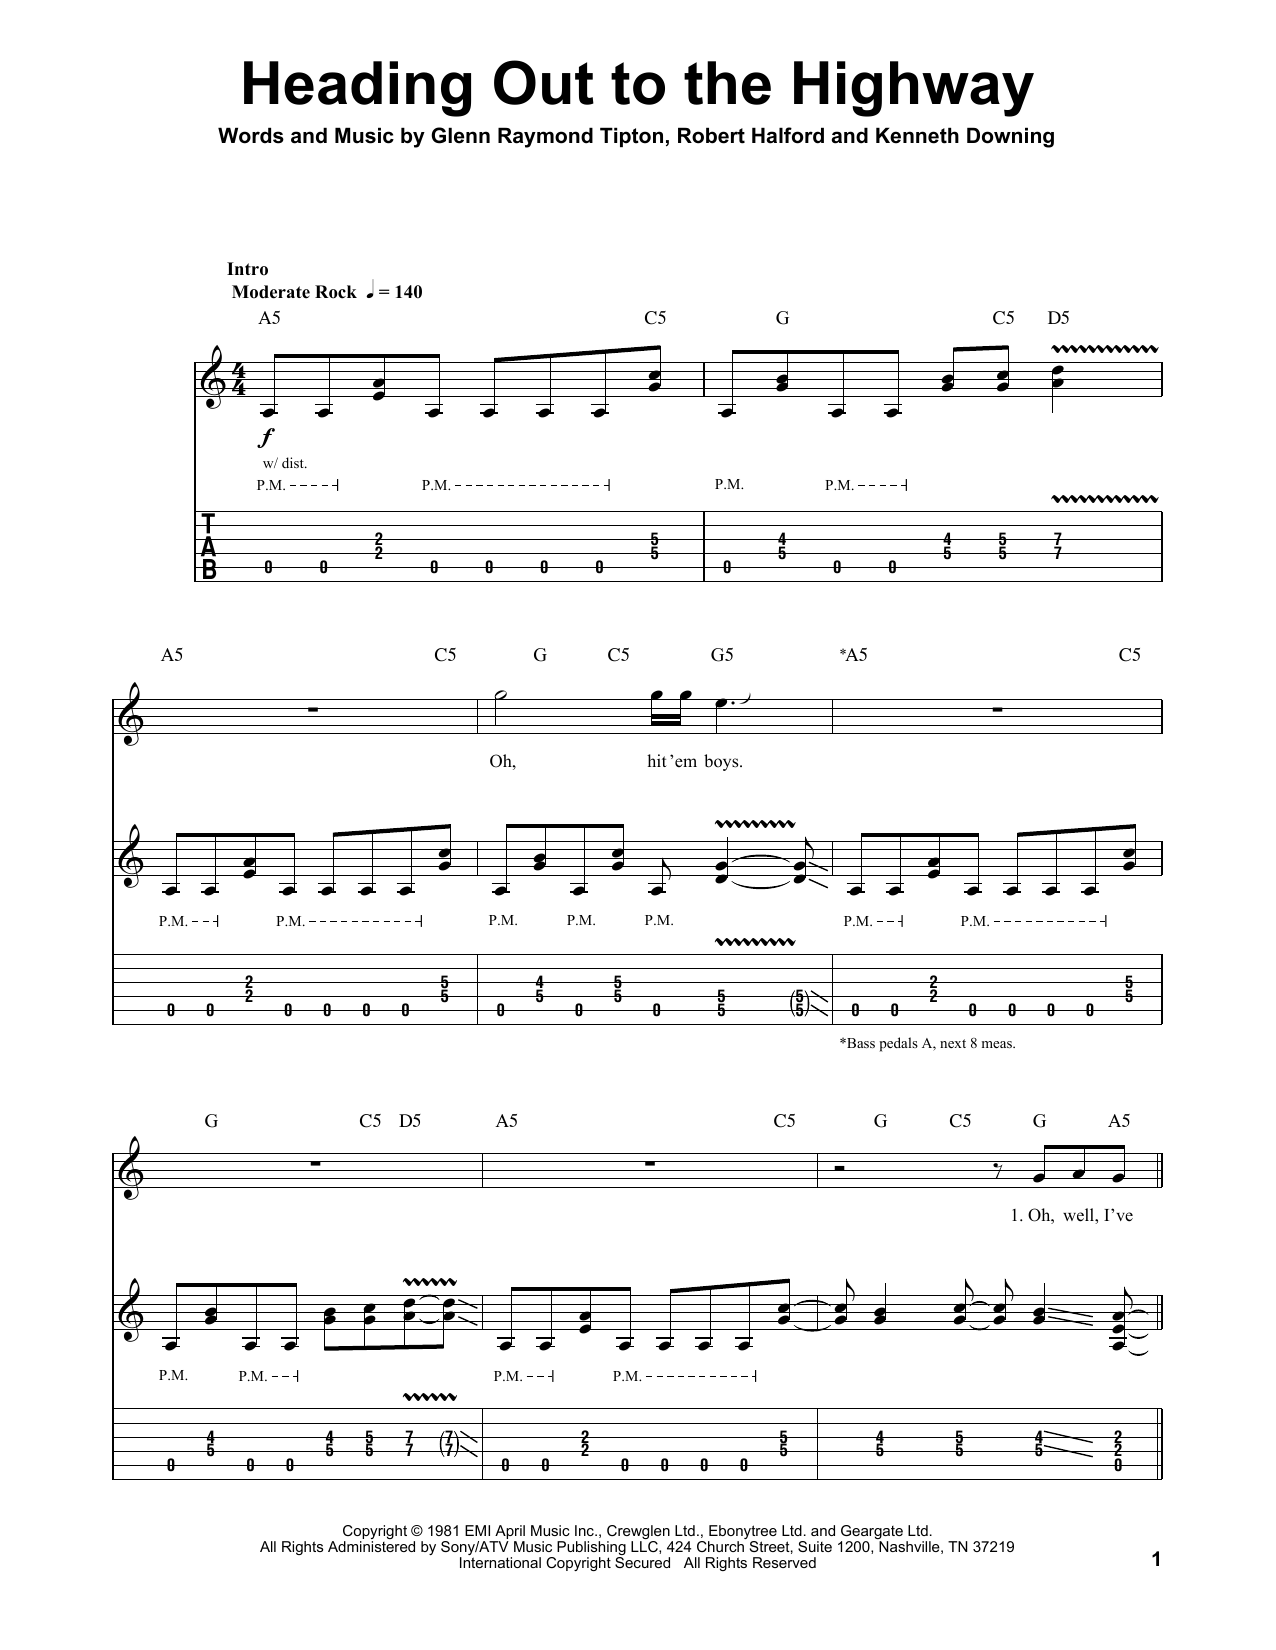 Download Judas Priest Heading Out To The Highway Sheet Music